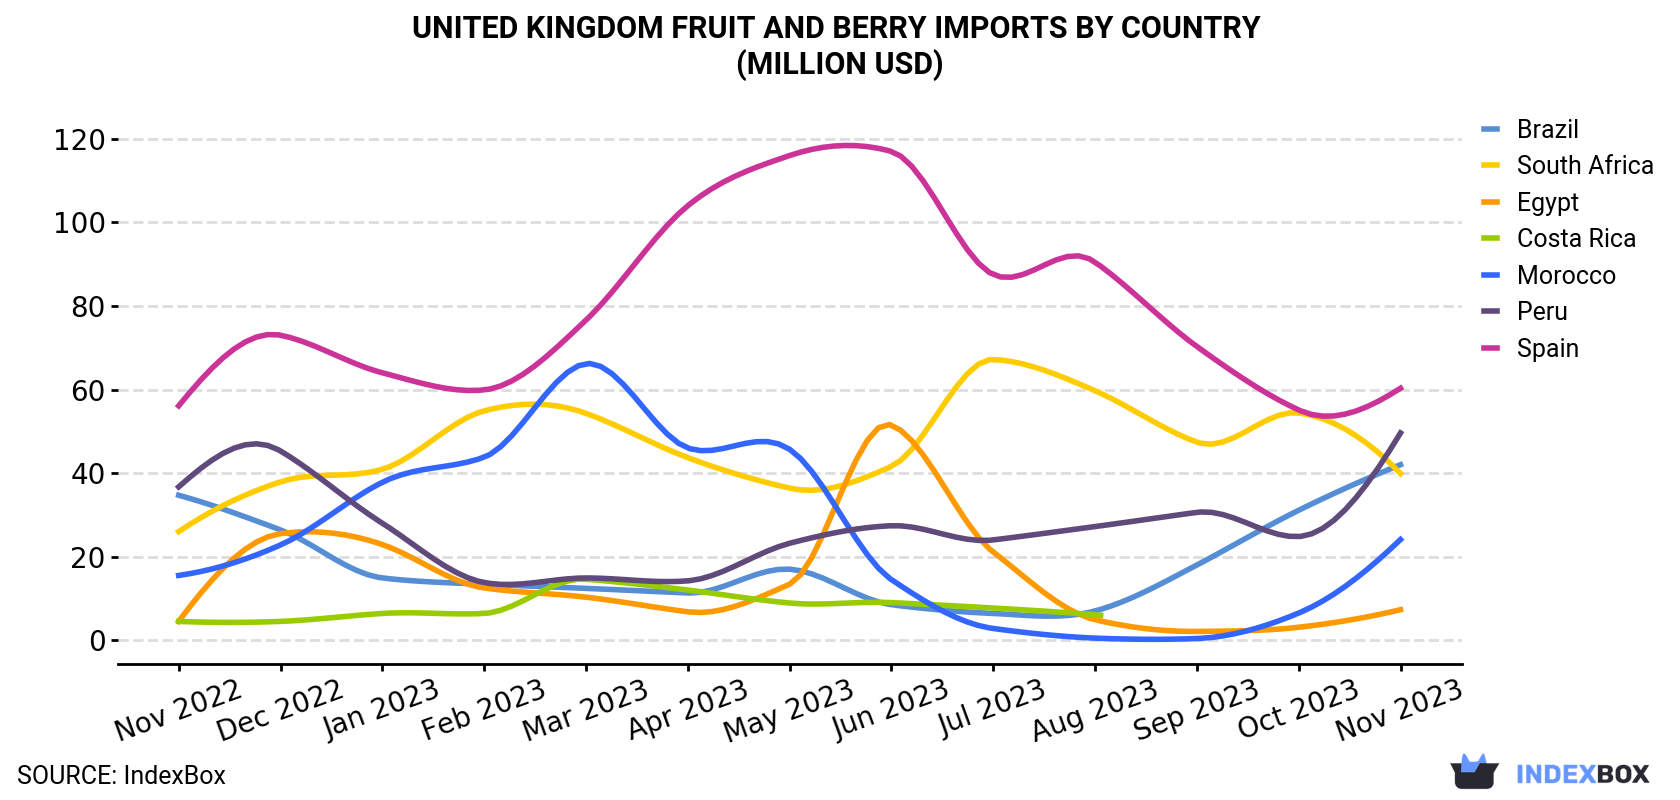 United Kingdom Fruit and Berry Imports By Country (Million USD)